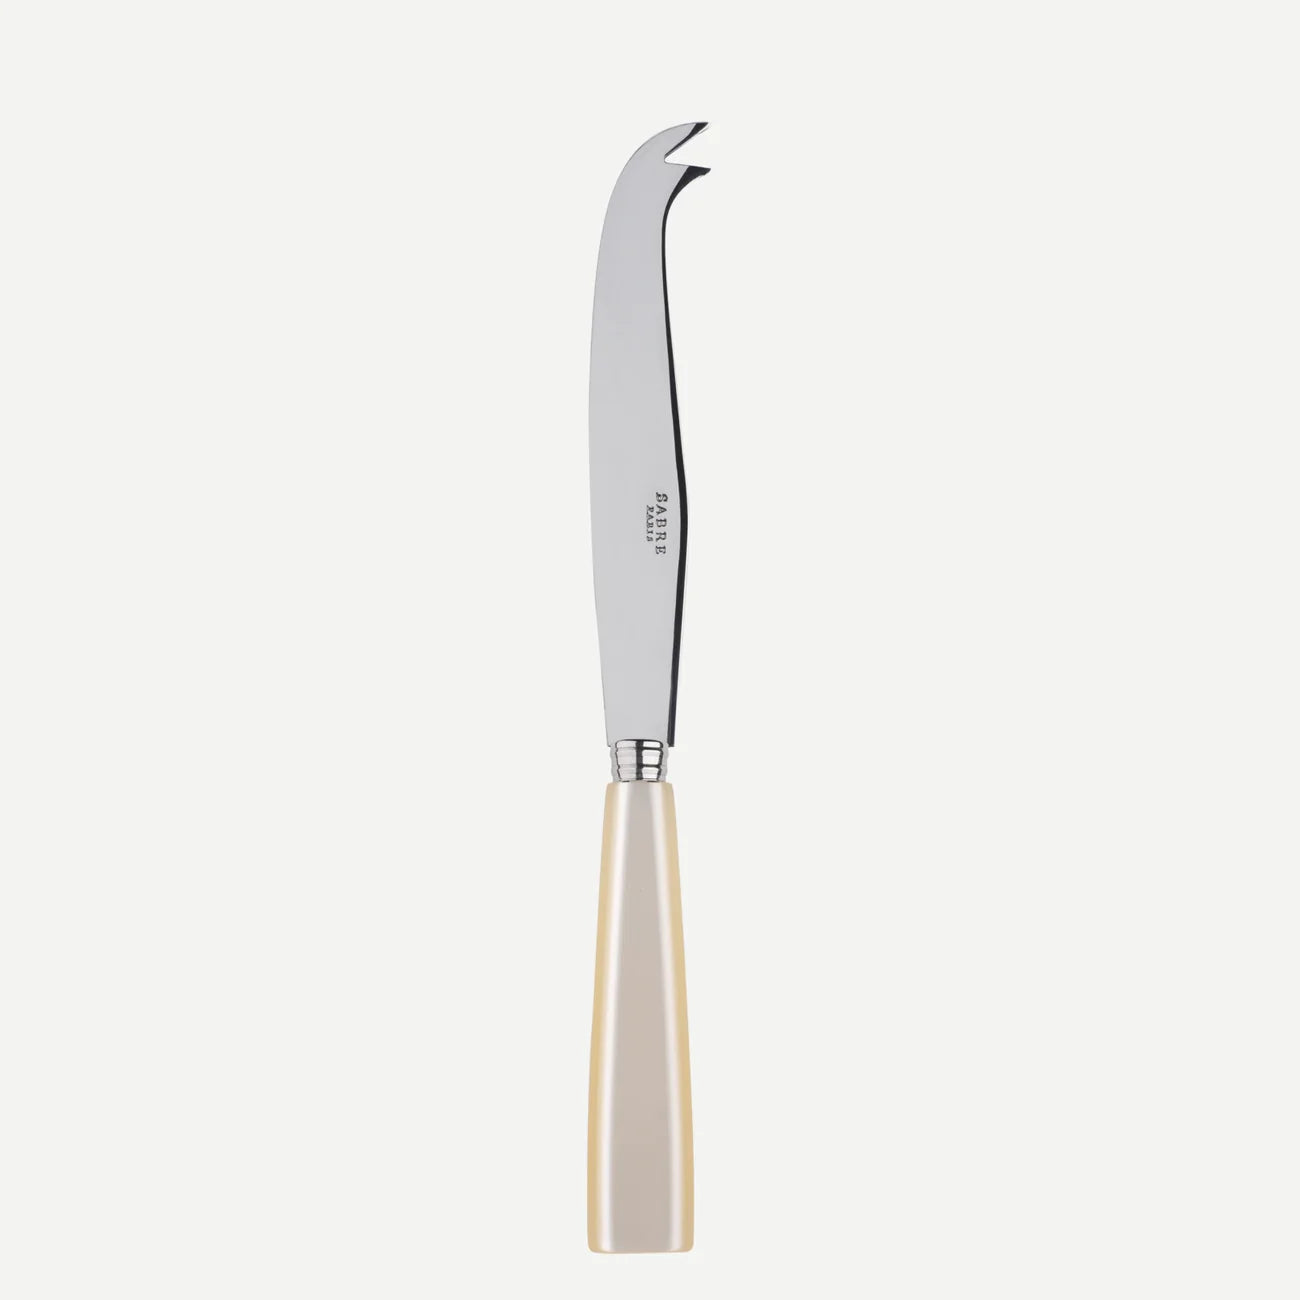 A sabre paris cheese knife with a natural pearl coloured handle.